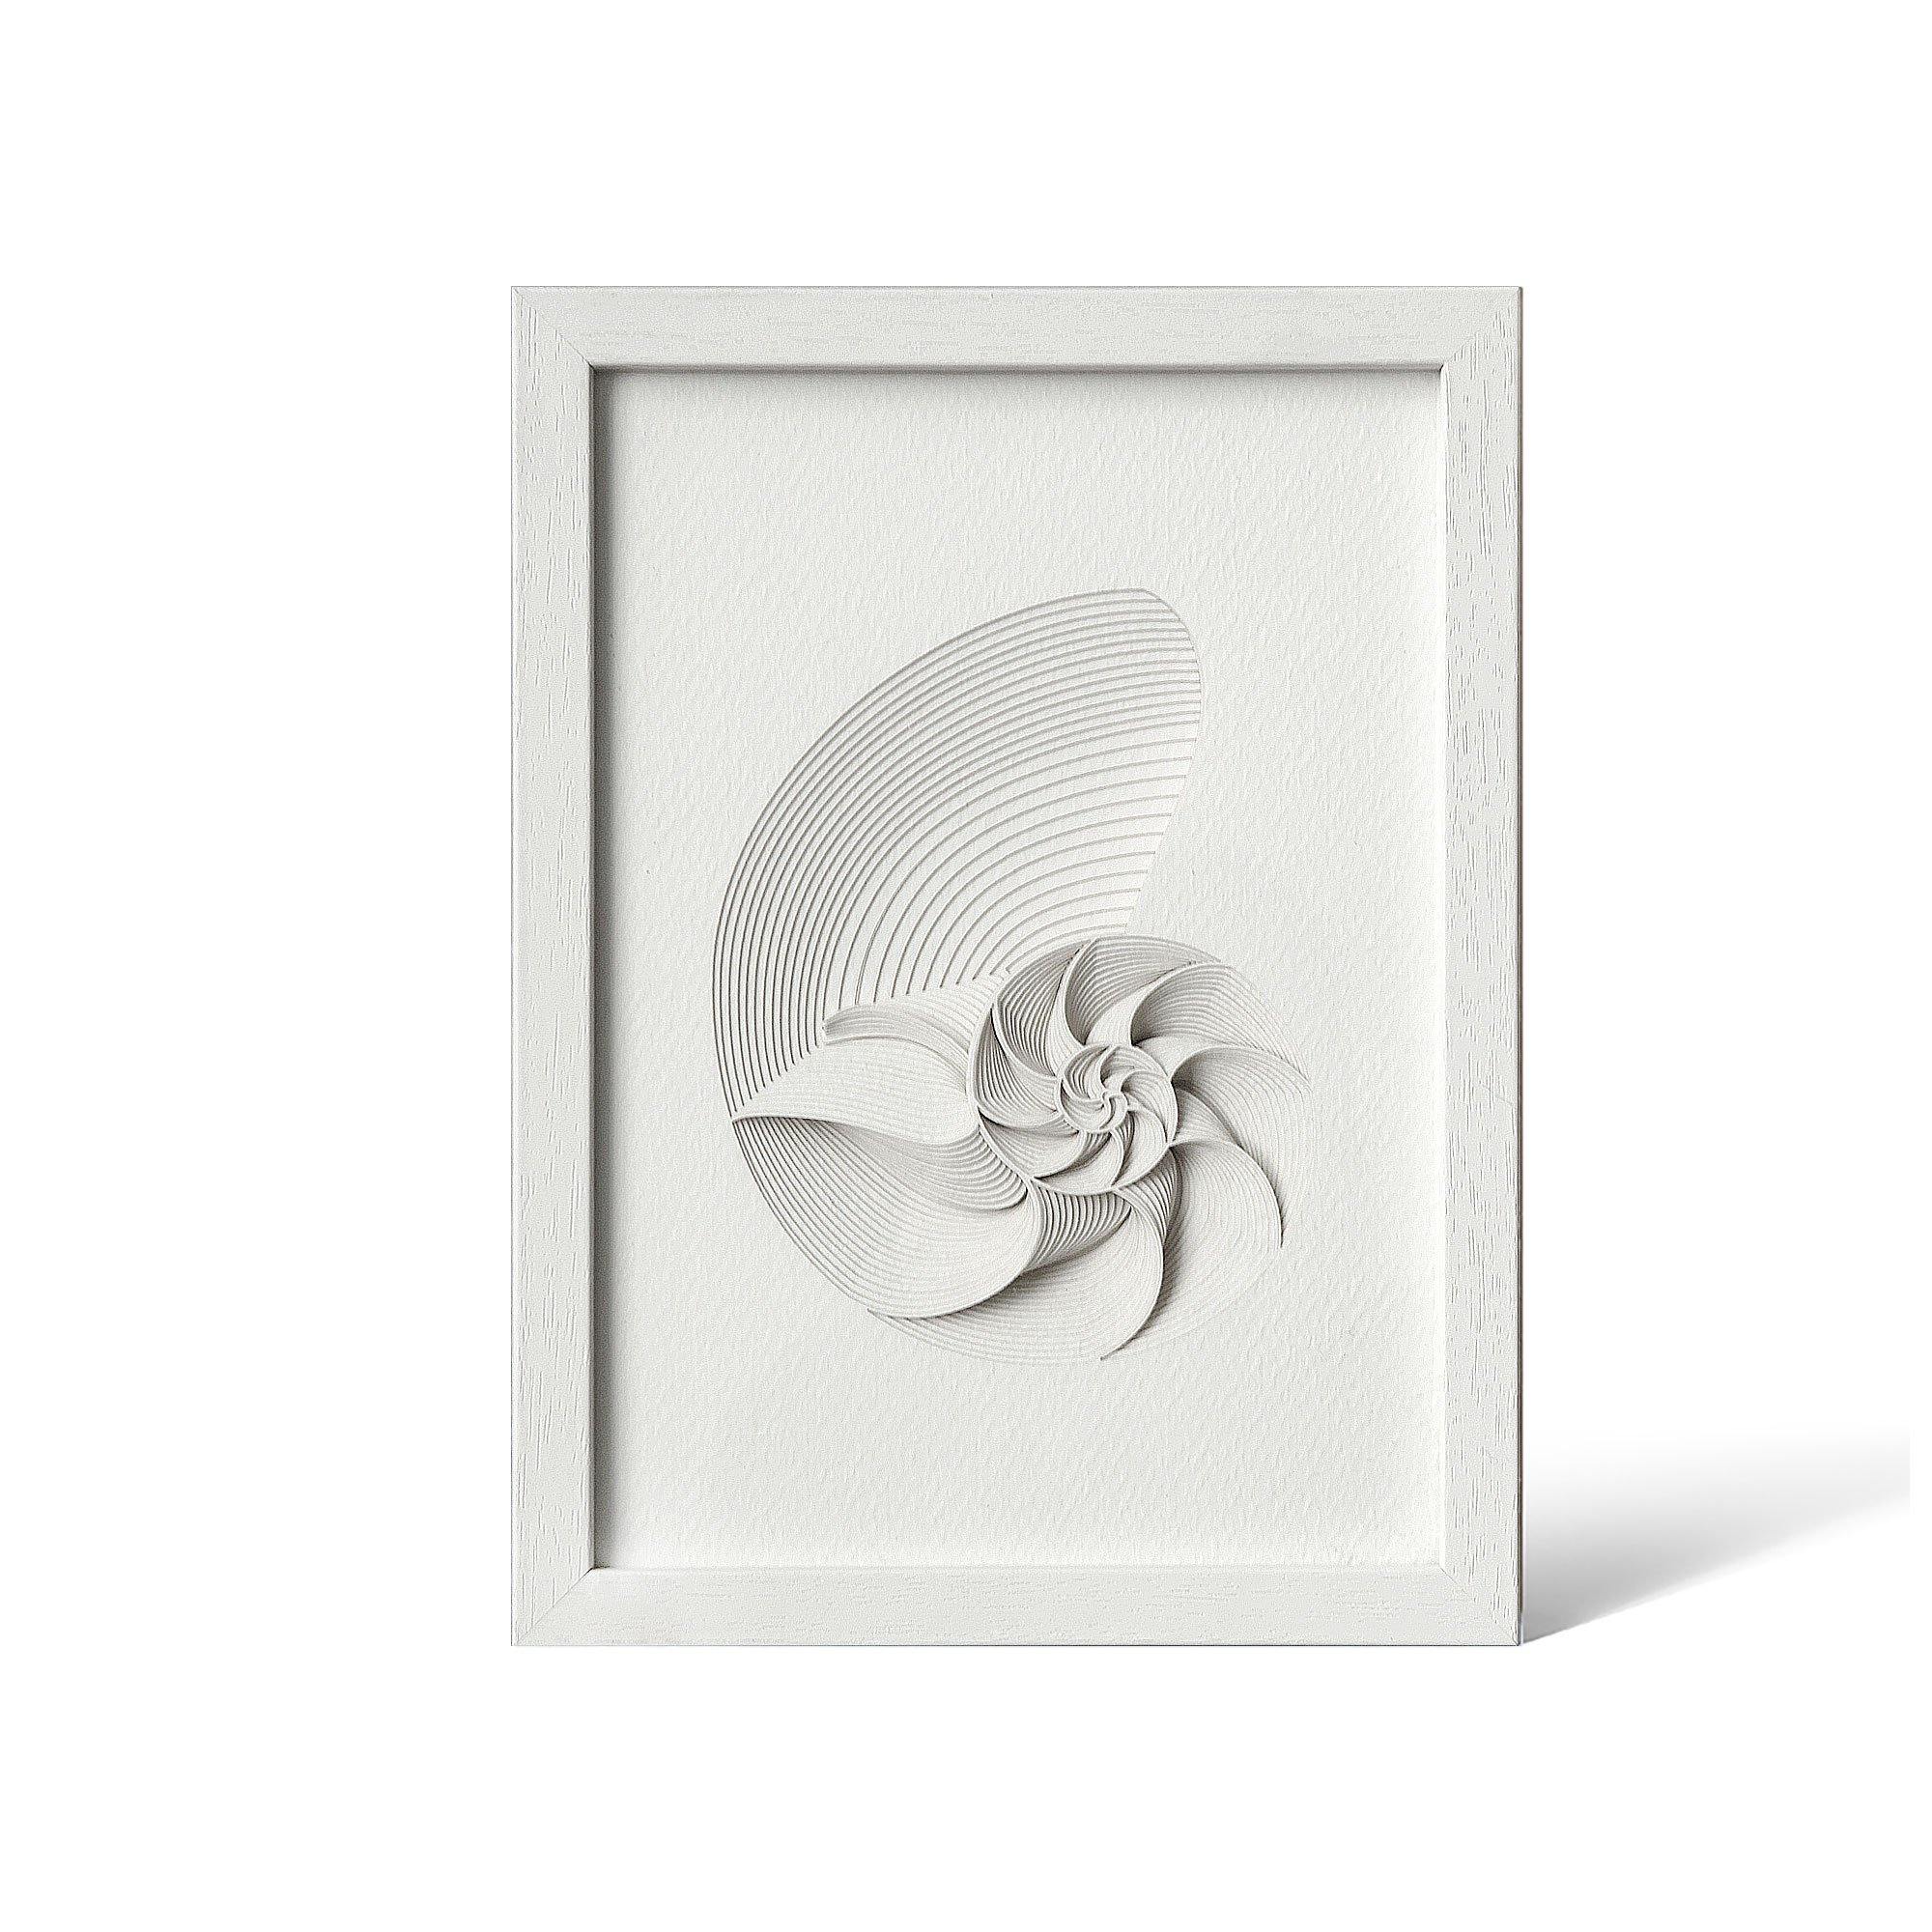 o3designstudio Nautilus Paper Art  IDEAL GIFTS A5 white framed mian PA3001